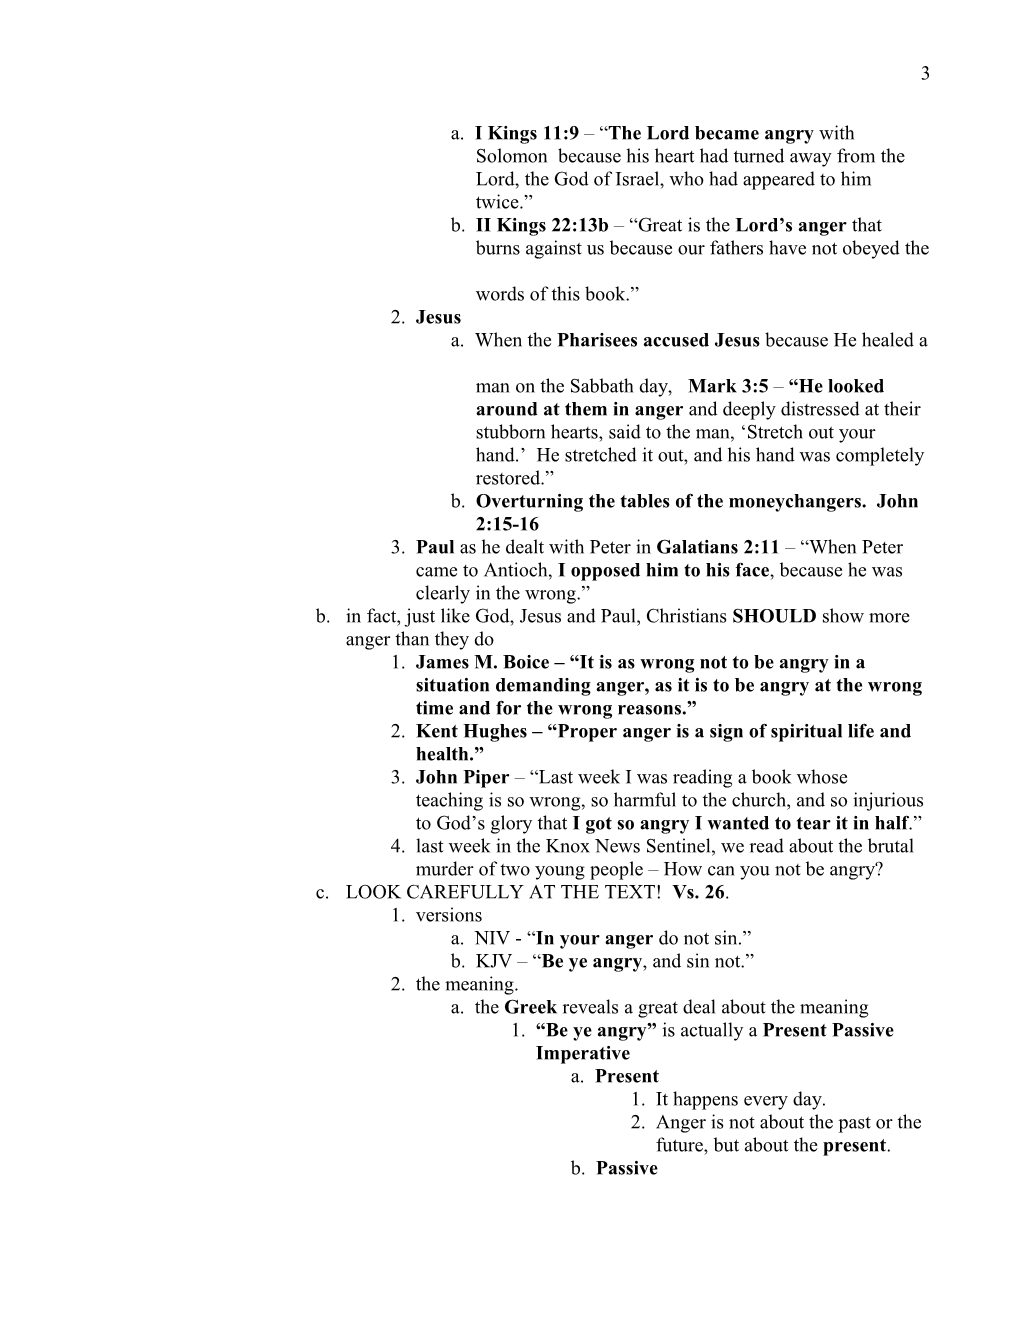 Sermon Notes for January 28, 2007